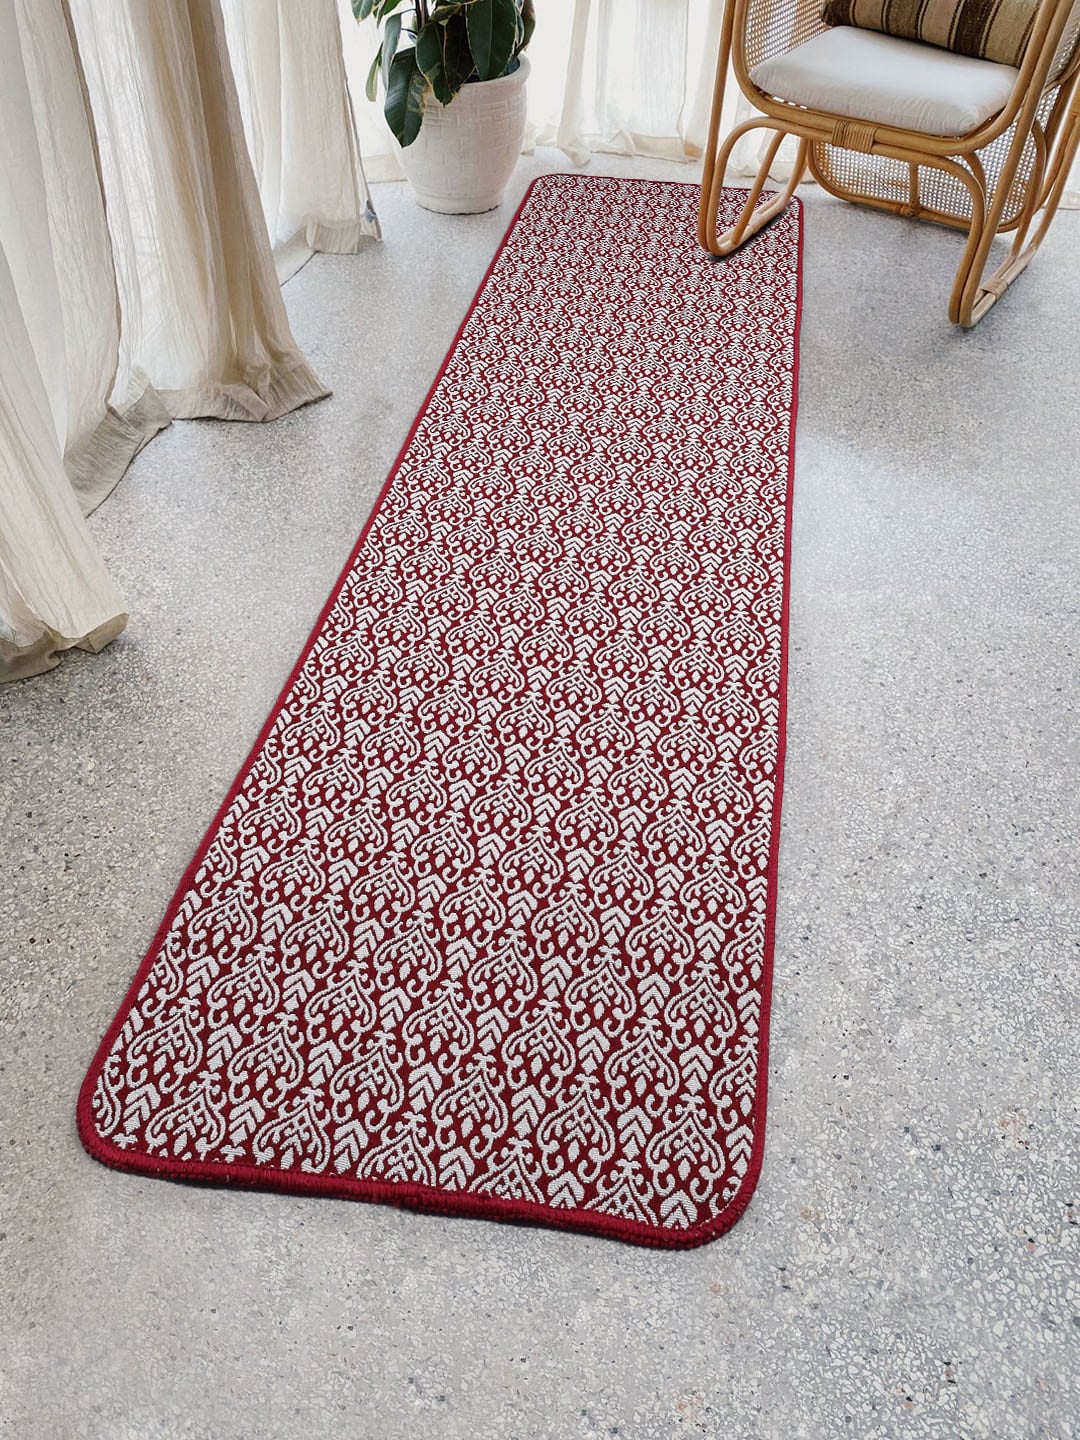 Saral Home Red & White Floral Anti-Skid Floor Runner Price in India